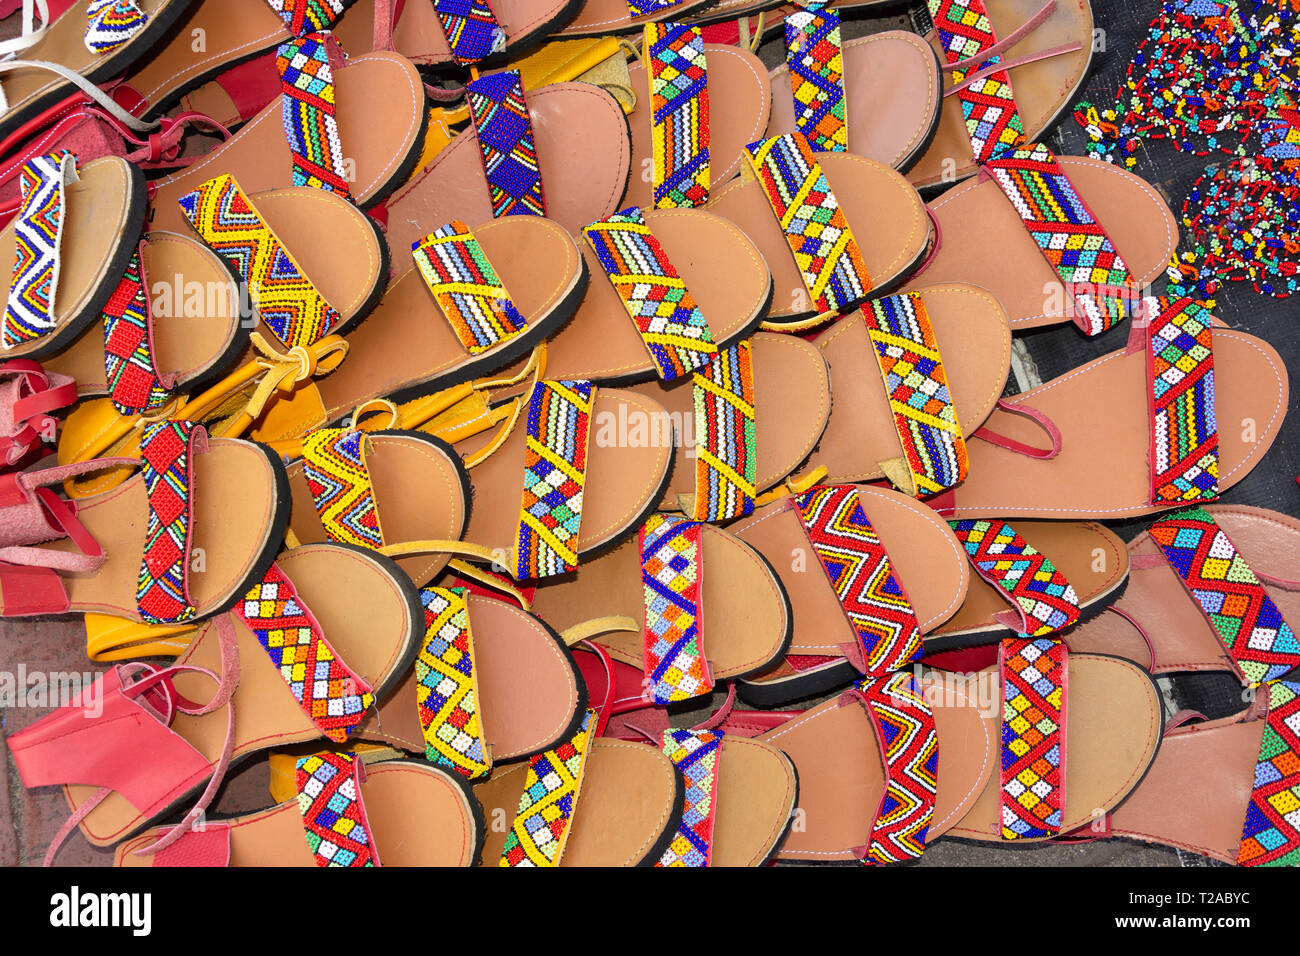 Colourful Zulu beaded sandals in souvenir stall, Snell Parade, Durban, KwaZulu-Natal, South Africa Stock Photo